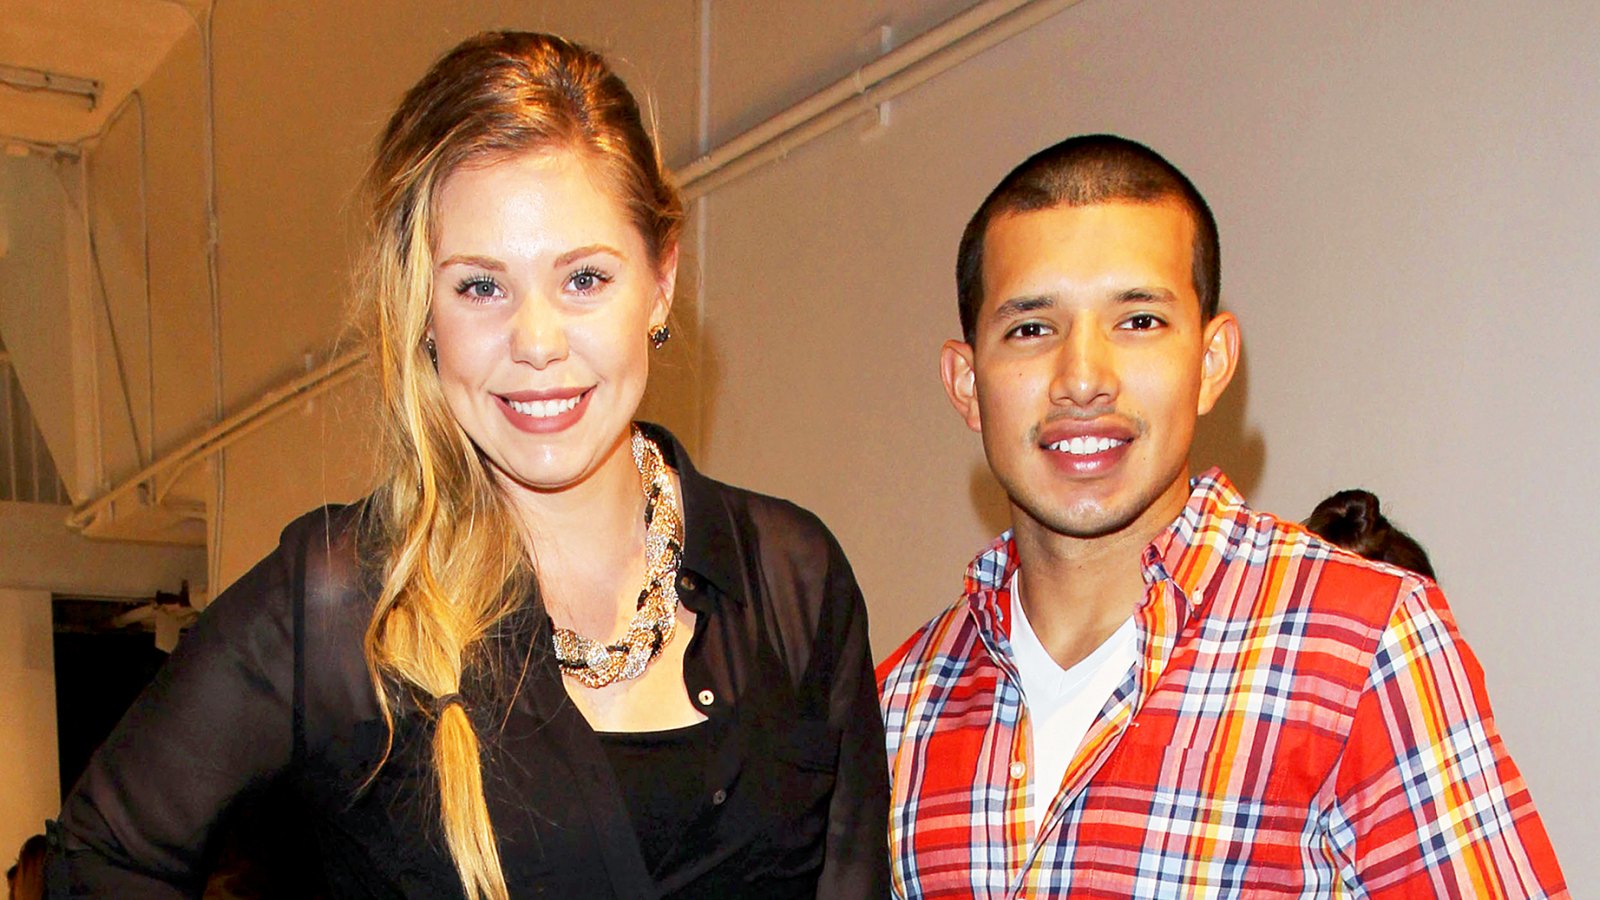 Kailyn Lowry and Javi Marroquin Teen Mom